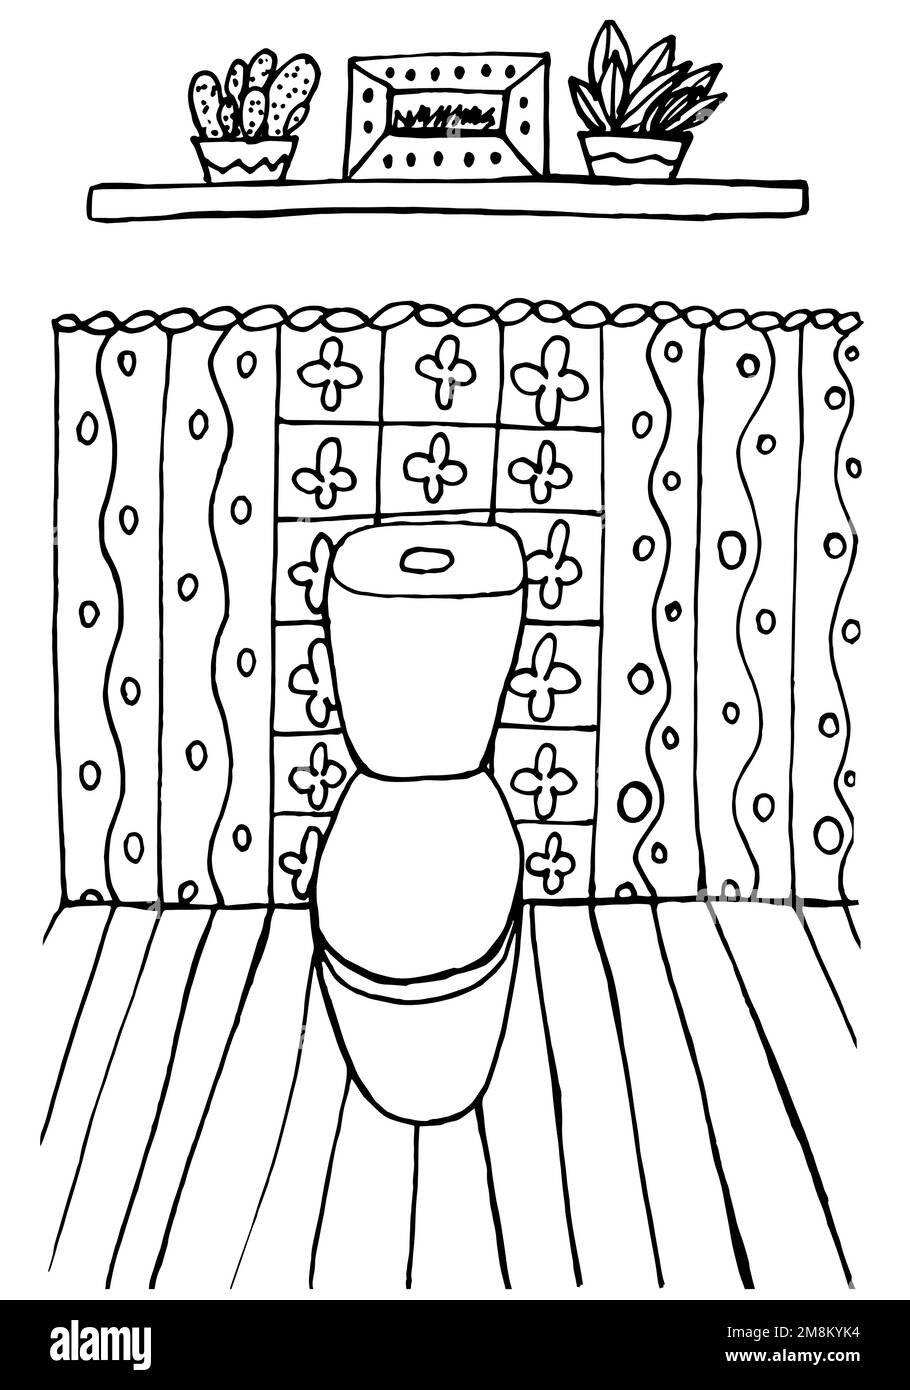 Cozy toilet colouring page Stock Vector